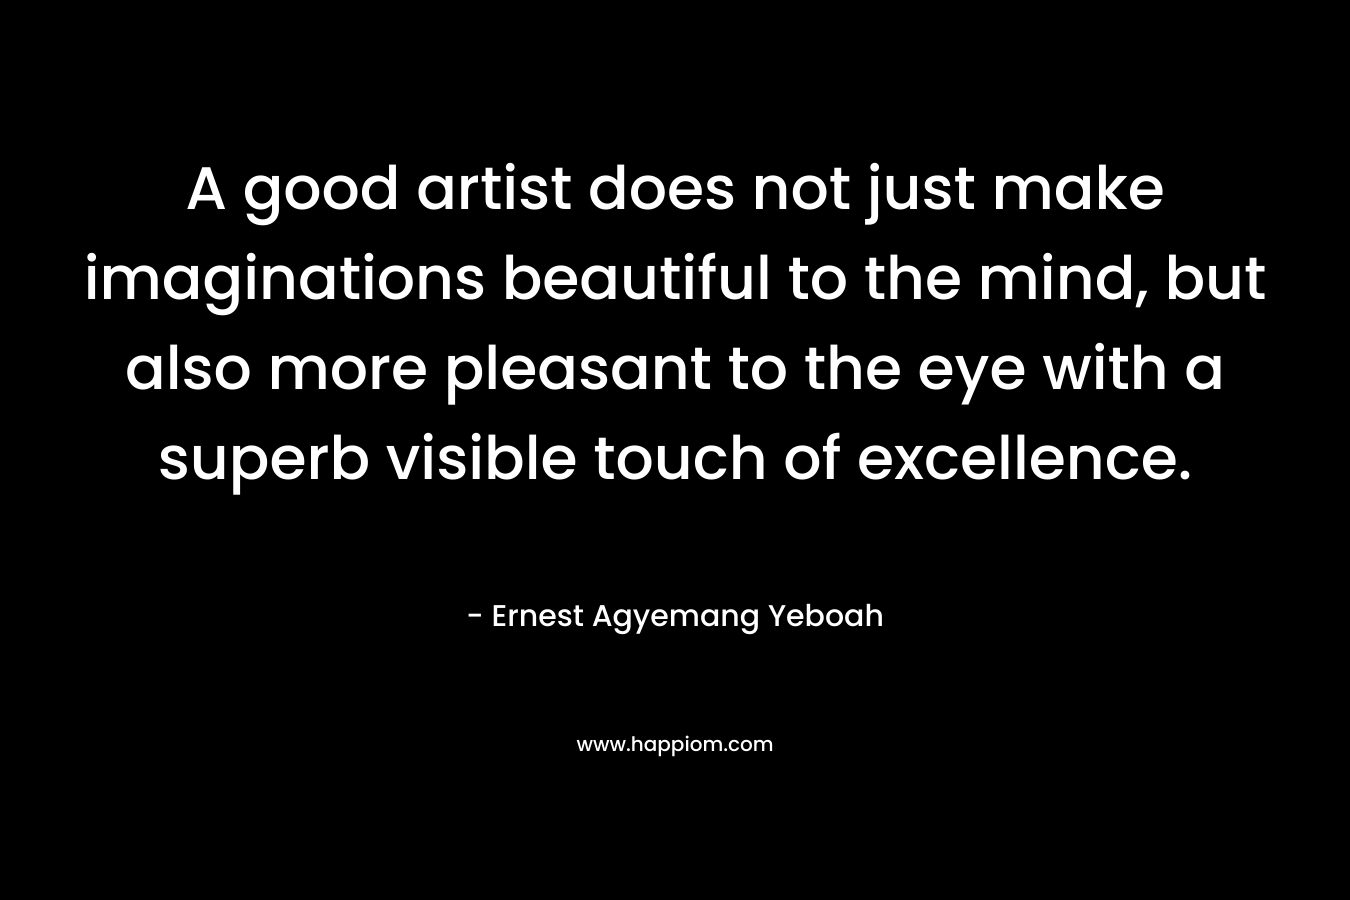 A good artist does not just make imaginations beautiful to the mind, but also more pleasant to the eye with a superb visible touch of excellence.